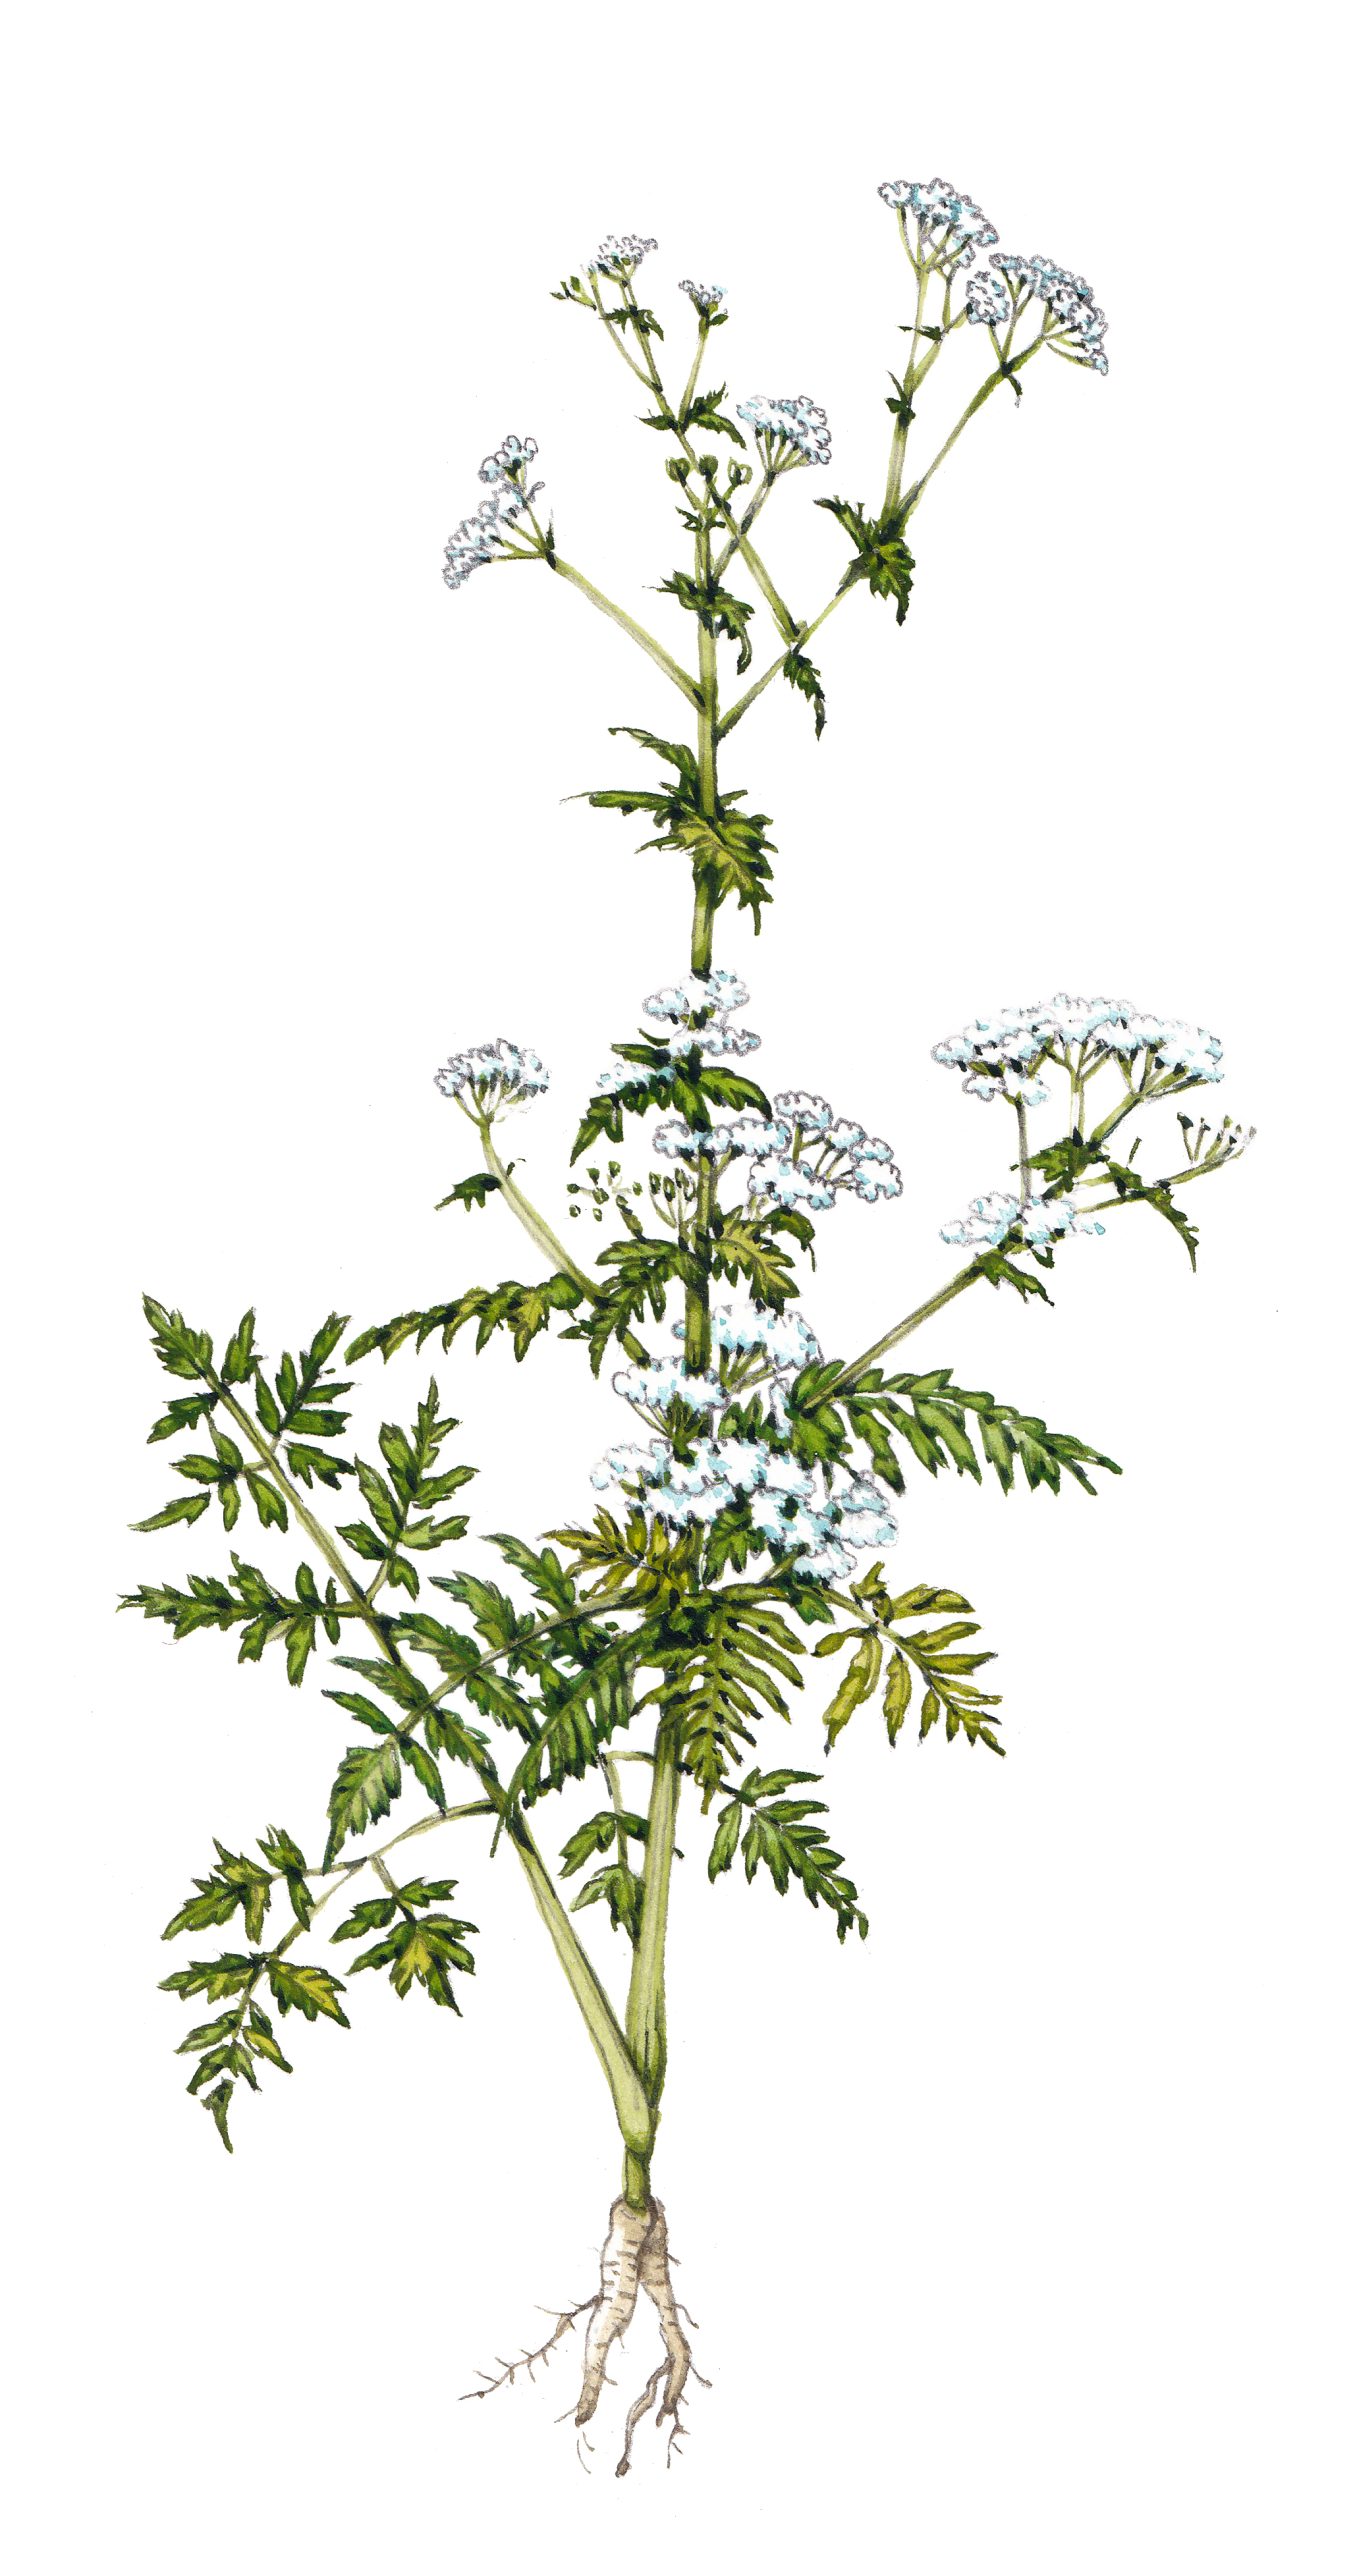 Cow parsley Anthriscus sylvestris finished - Lizzie Harper